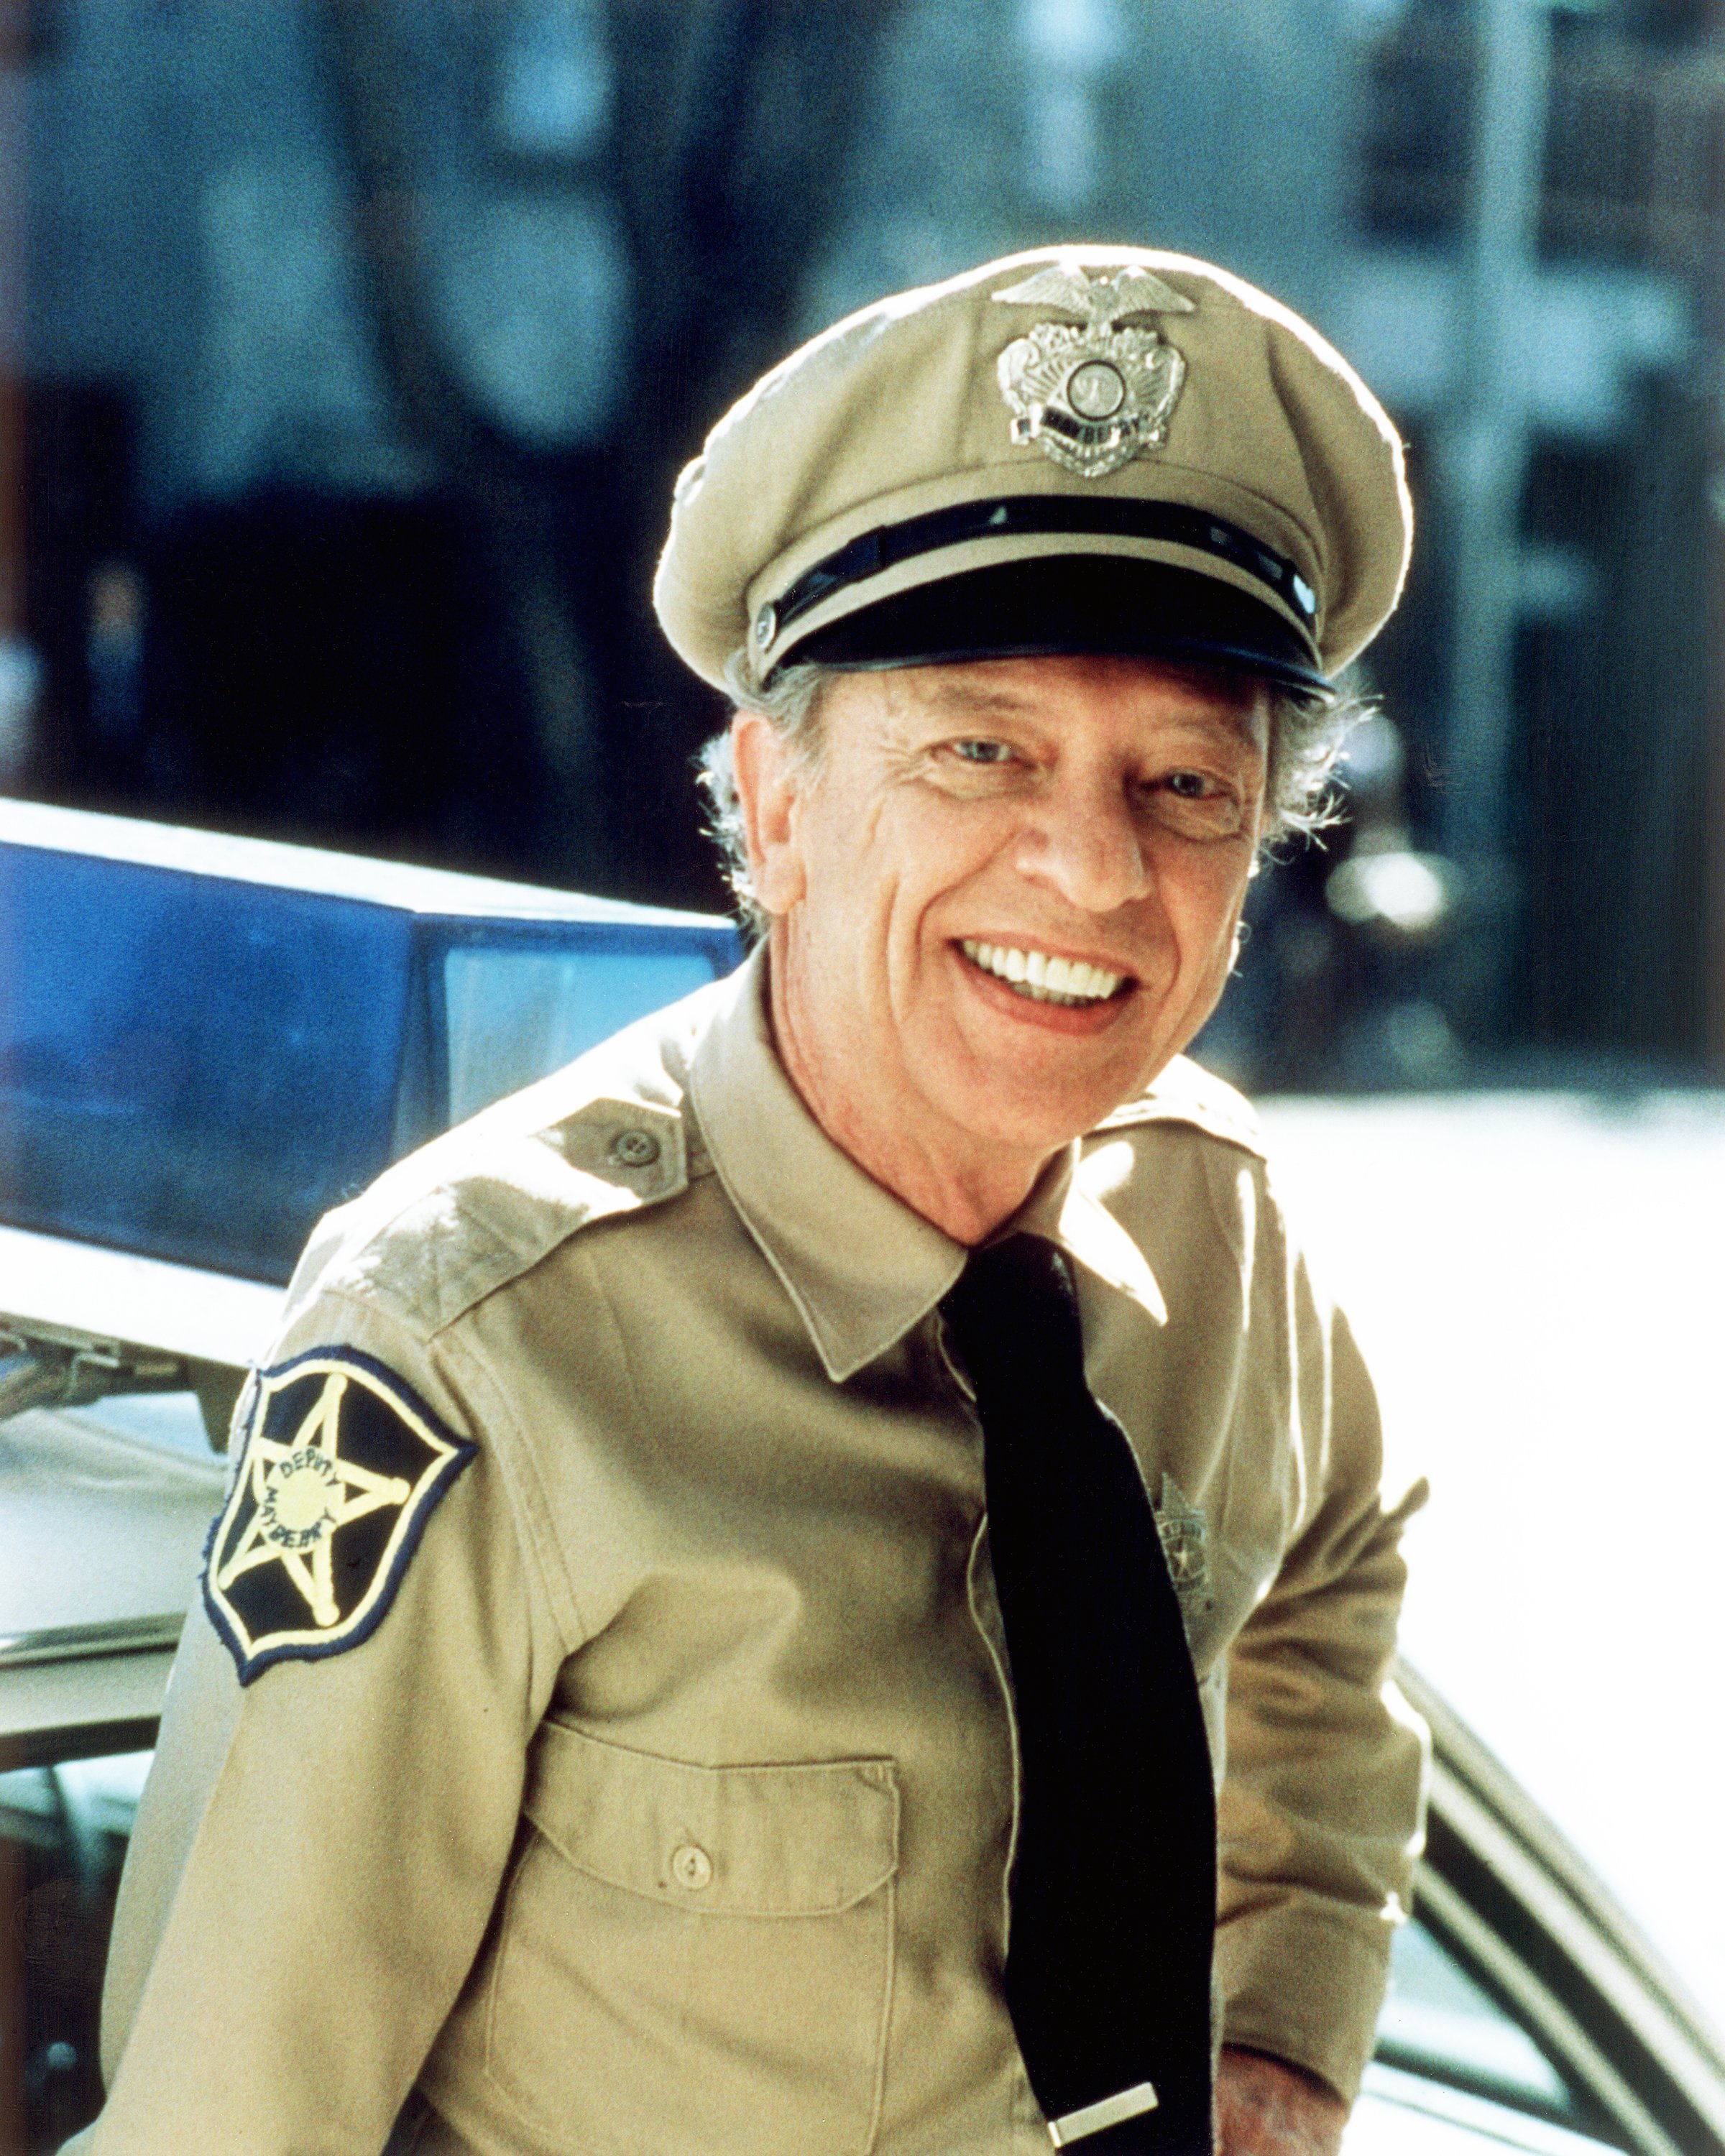 American comic actor Don Knotts as deputy sheriff Barney Fife in the TV series 'The Andy Griffith Show', circa 1965. | Source: Getty Images